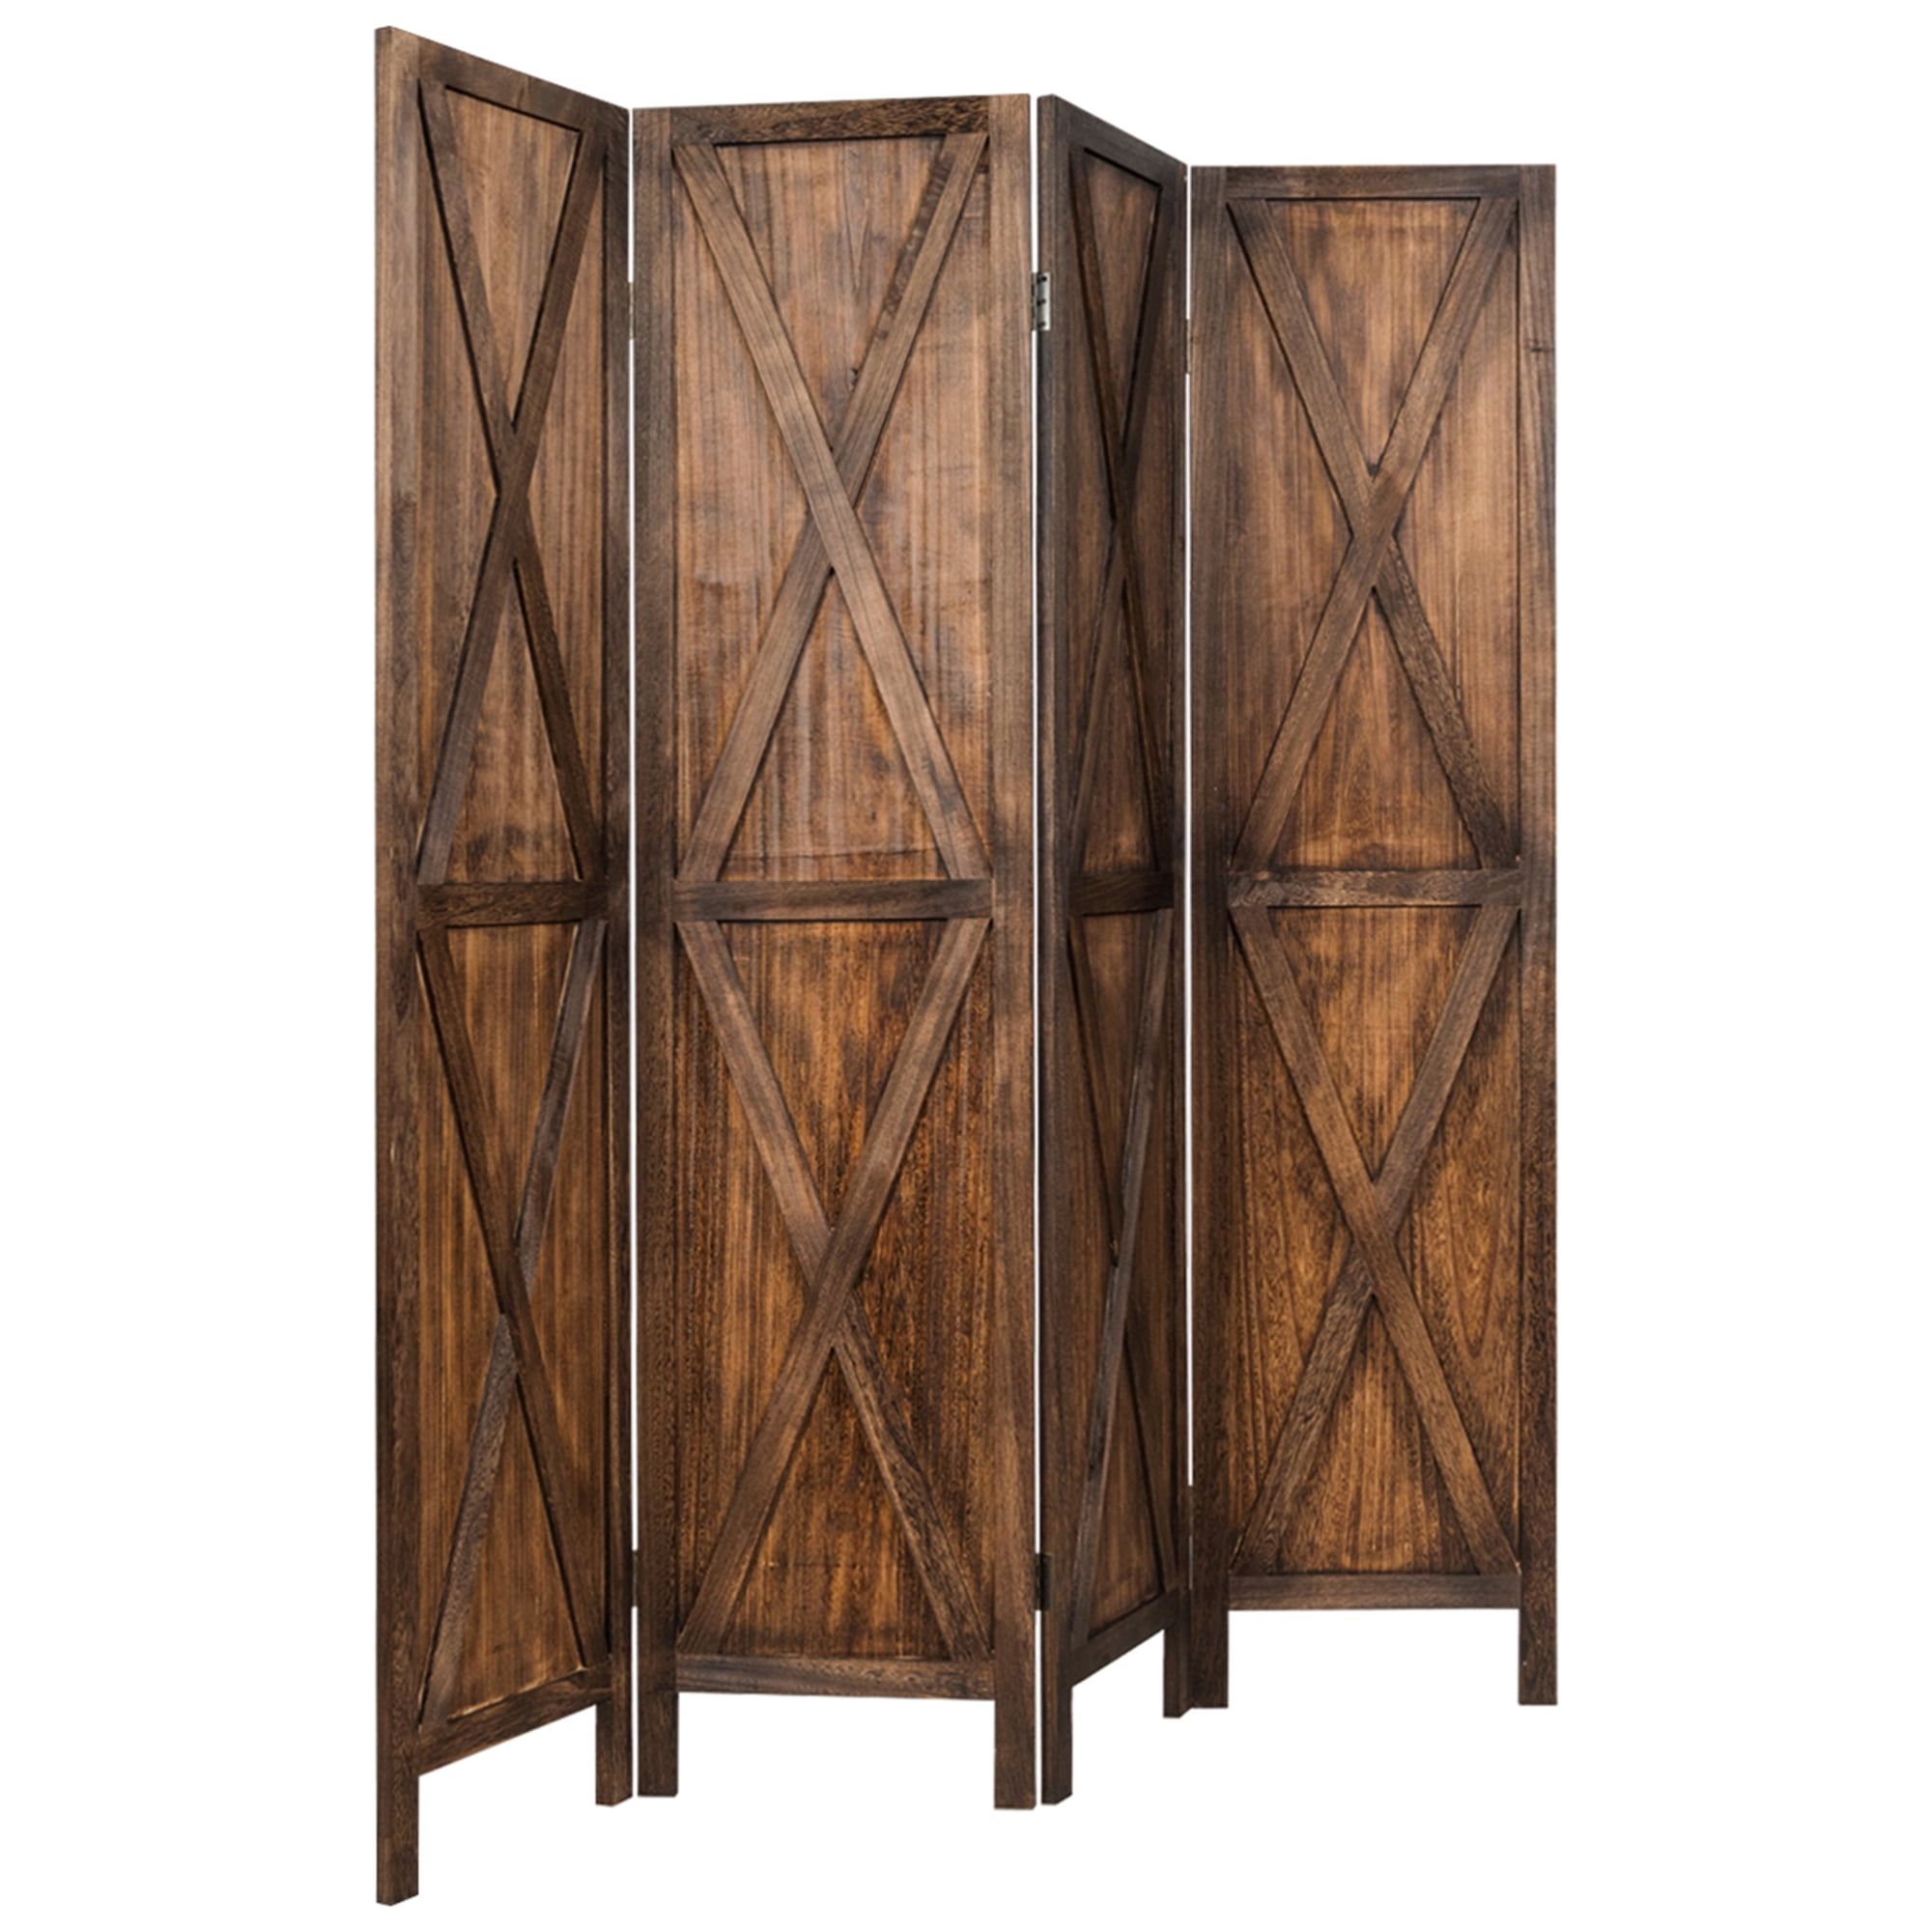 Details about   RHF 4 6 8 Panels Folding Room Divider Privacy Screens 5.6 Ft Wood Paravent Brown